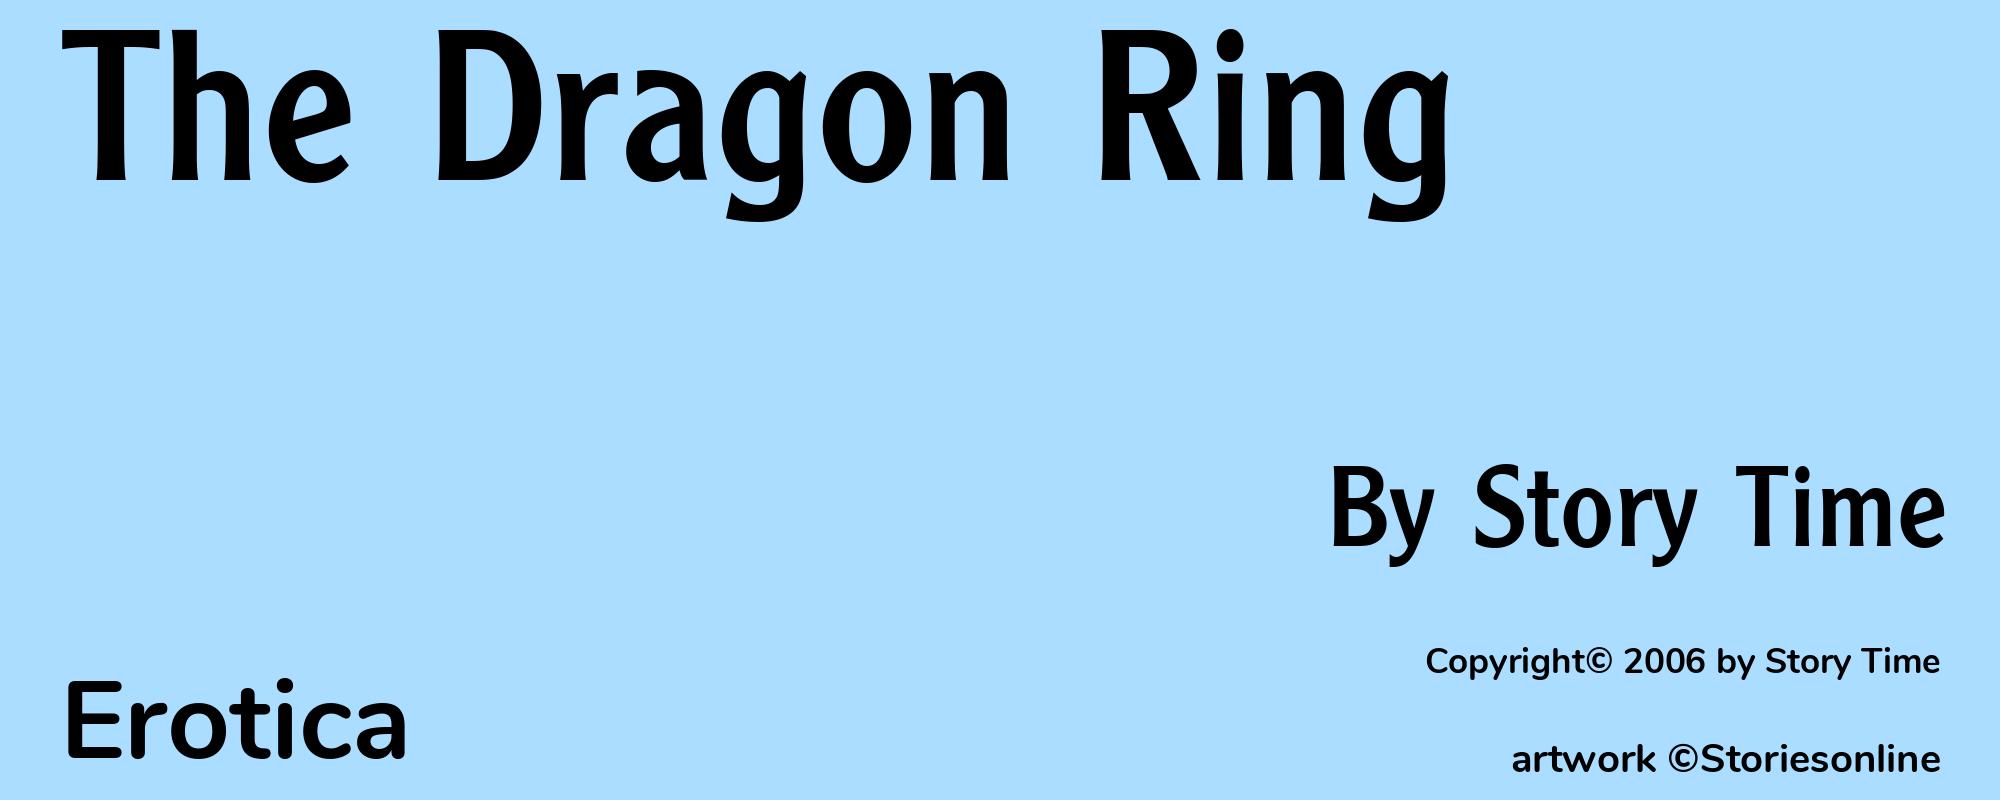 The Dragon Ring - Cover